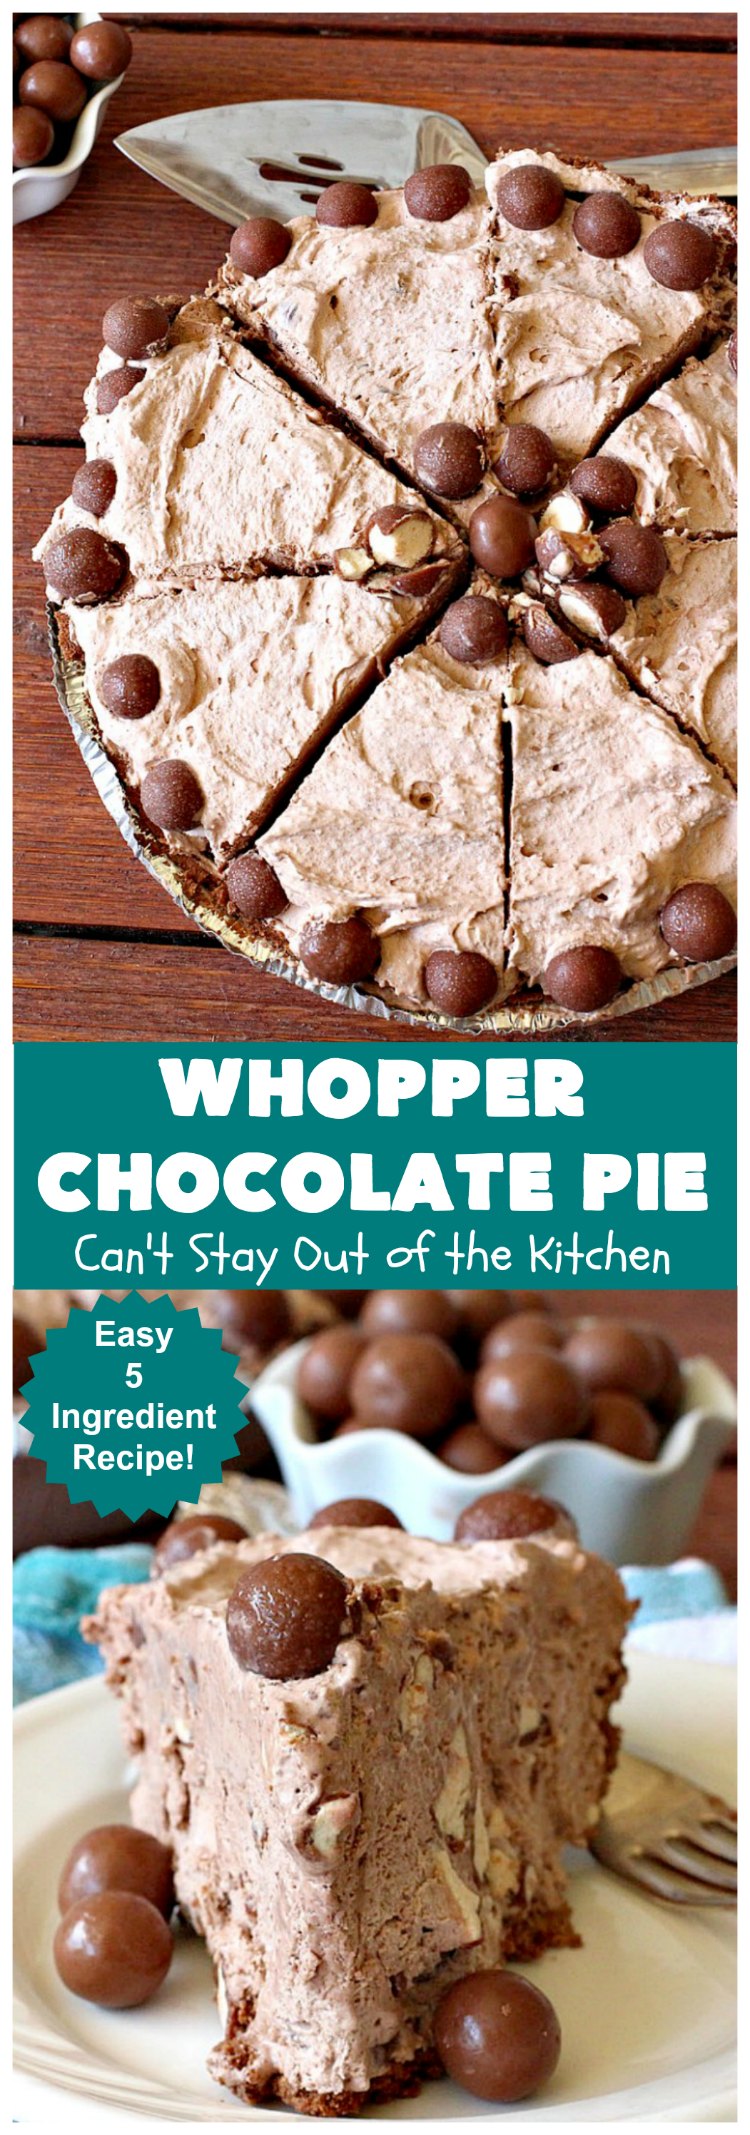 Whopper Chocolate Pie | Can't Stay Out of the Kitchen